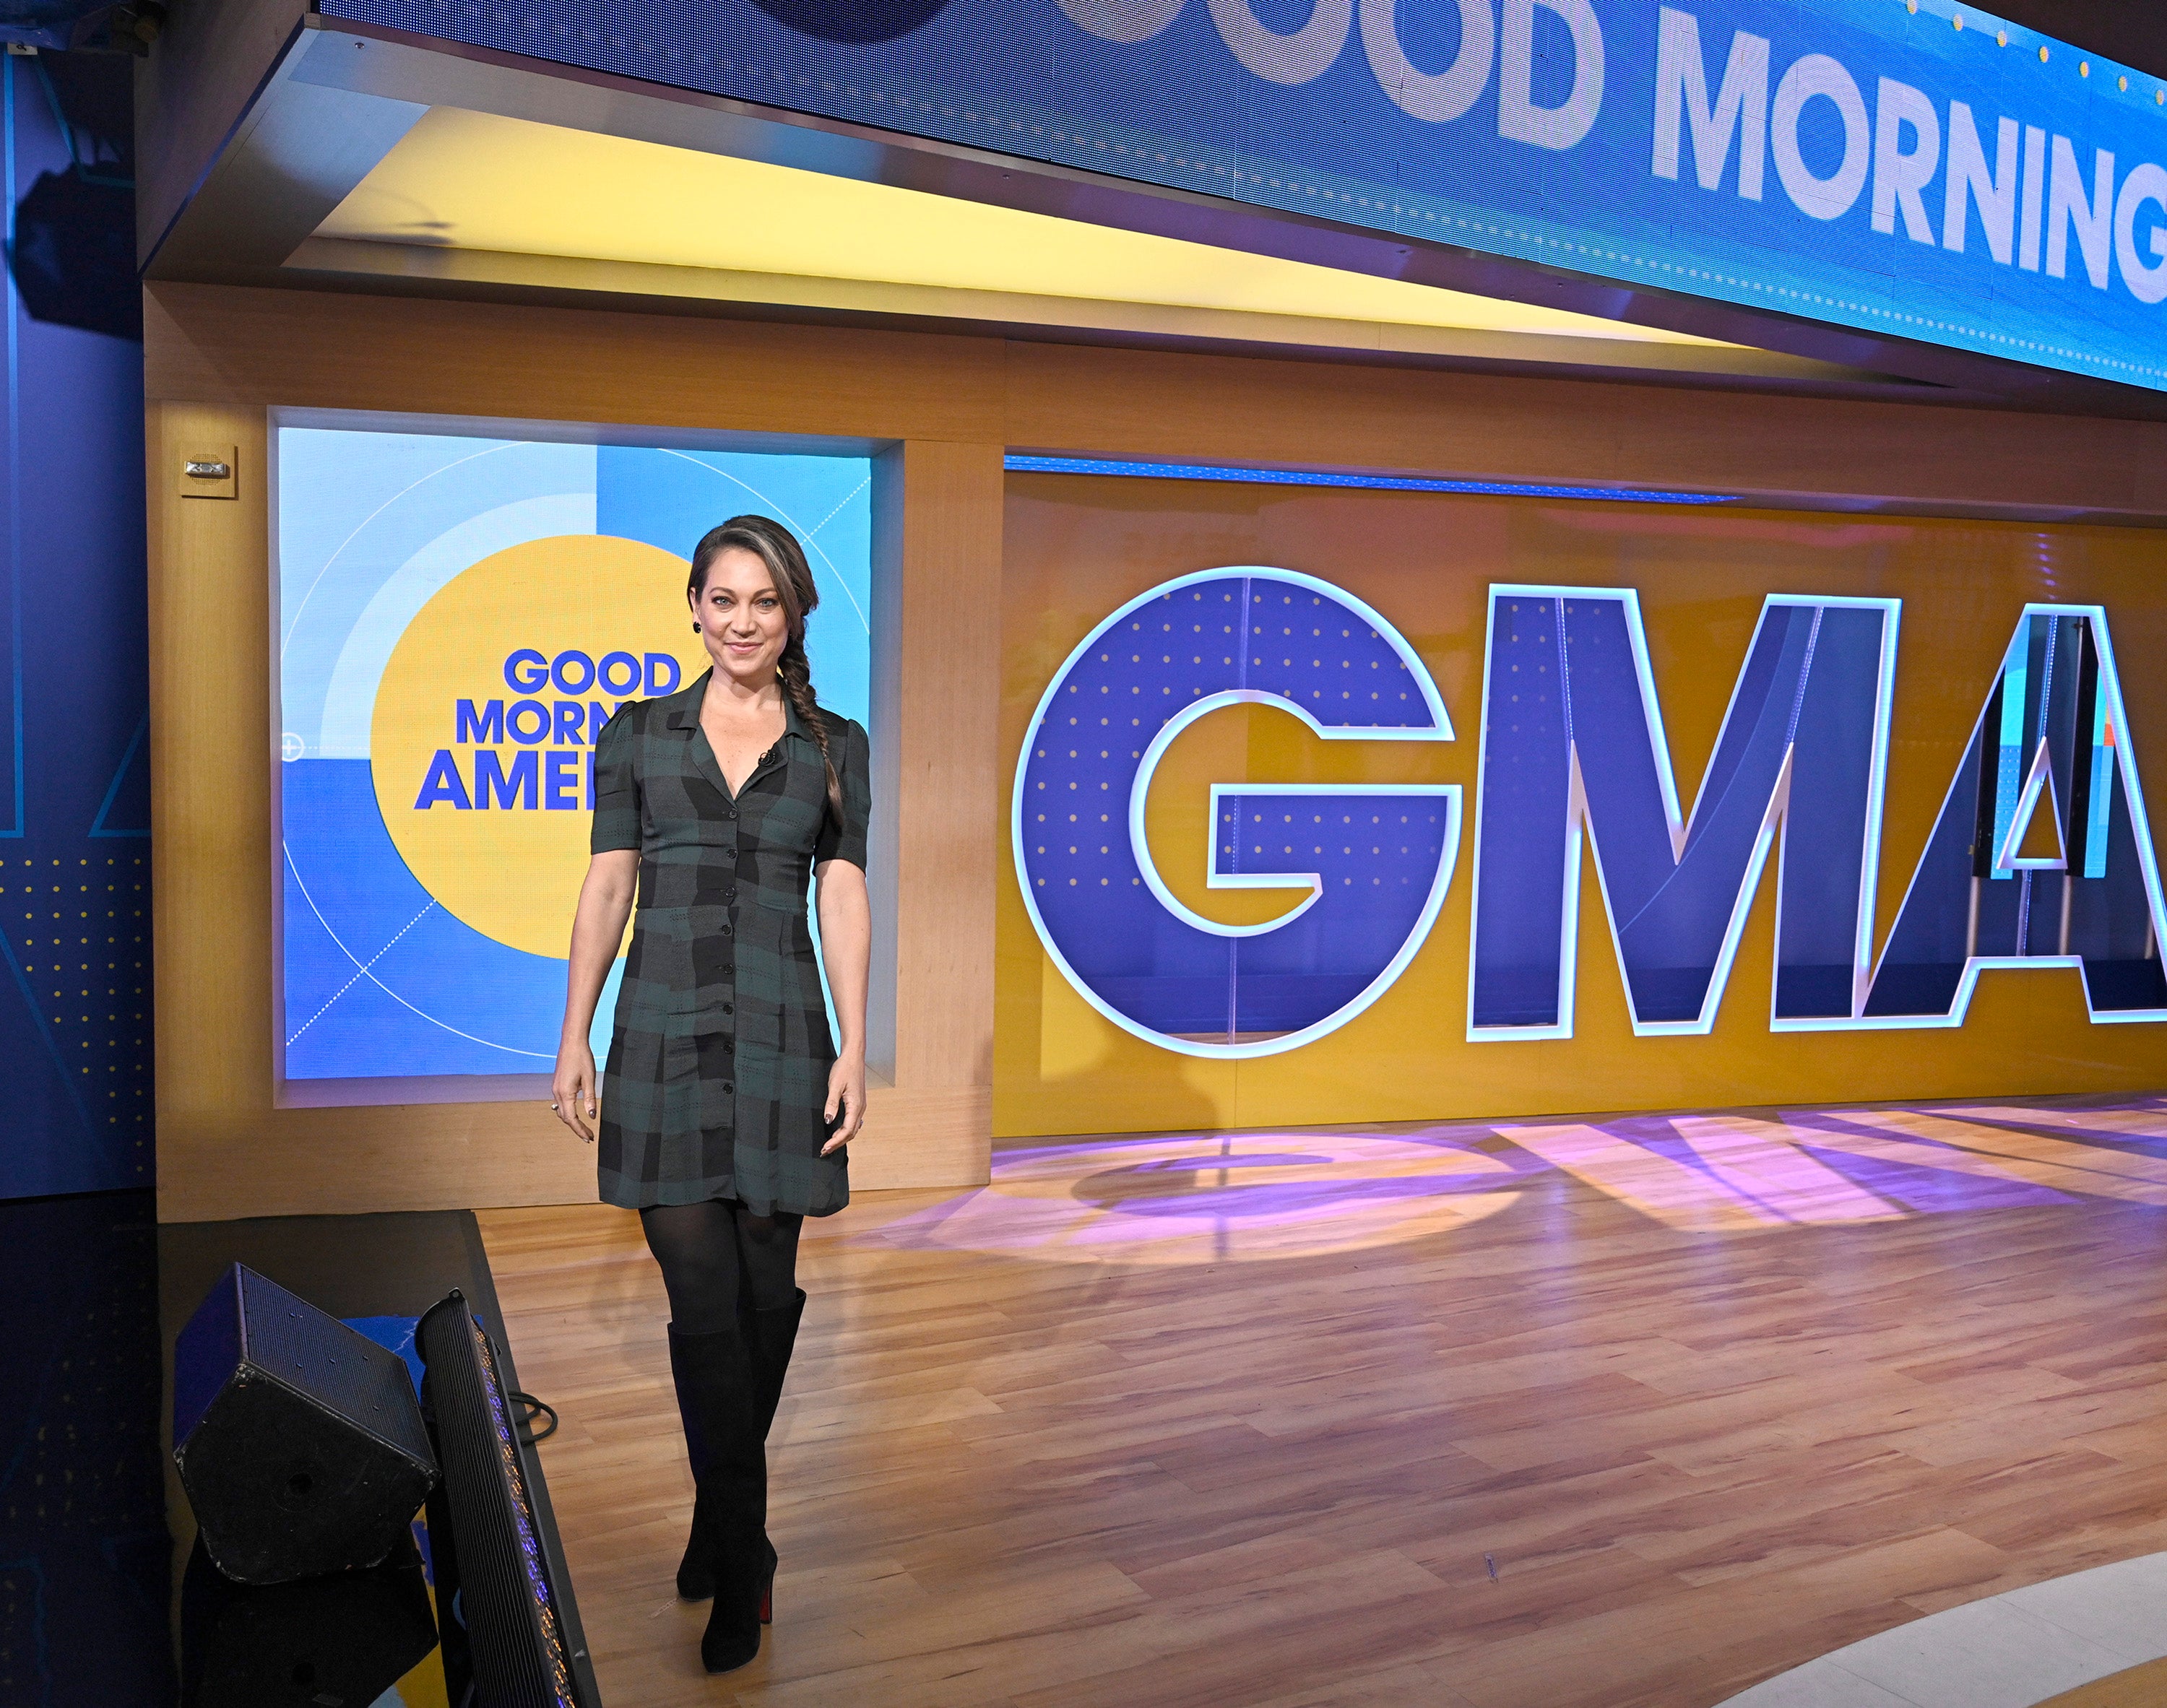 Ginger Zee is one of the lead meteorologists at ABC News